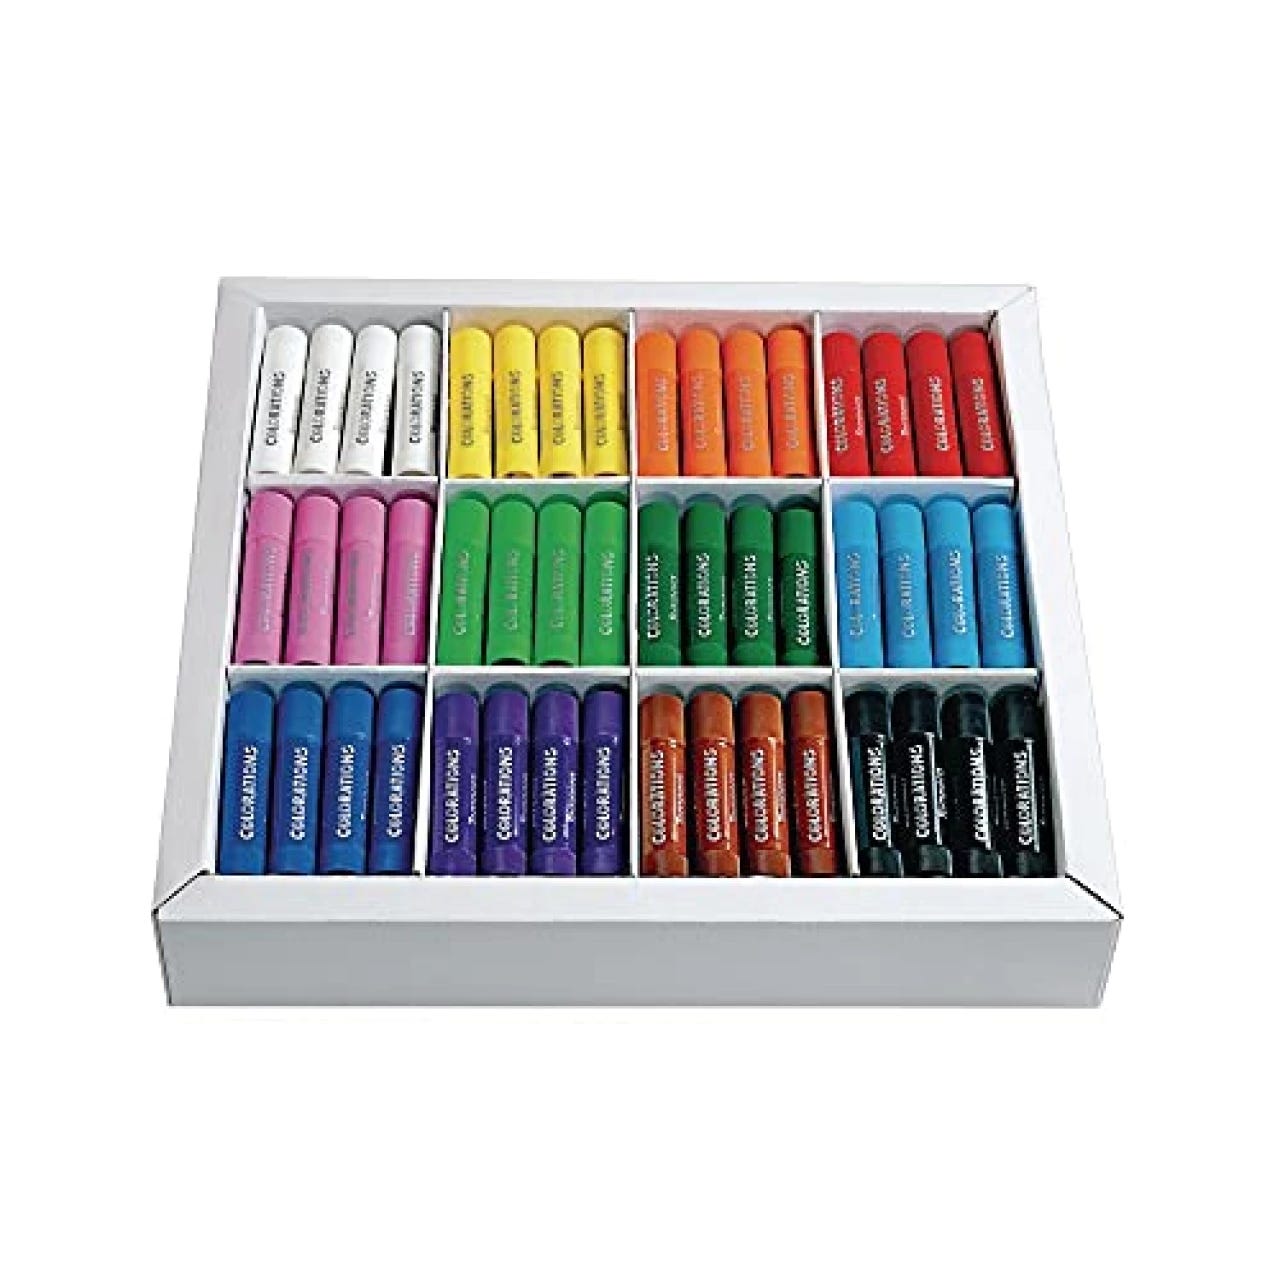 MayMoi Tempera Paint Sticks, Washable Paint Sticks for Kids, Non-Toxic,  Quick Drying & No Mess (12 Bright Colors)